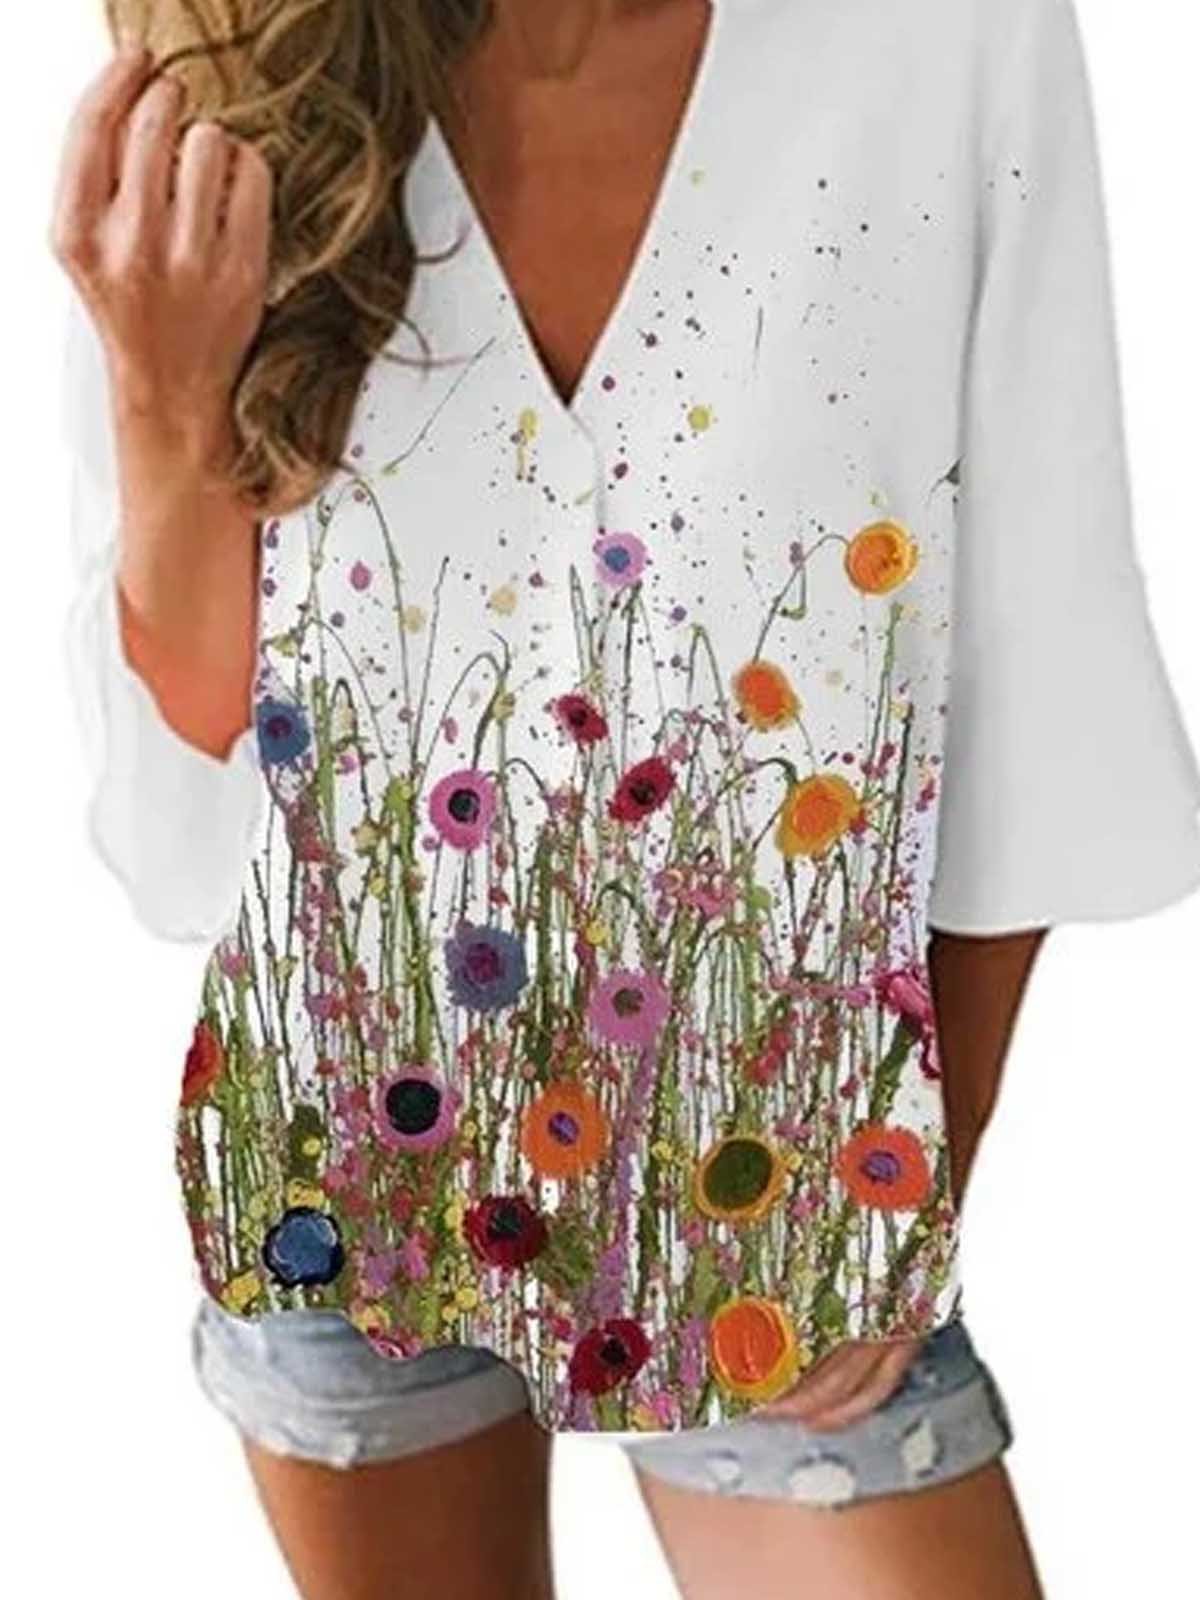 White Printed Cotton Half Sleeve Patchwork Top